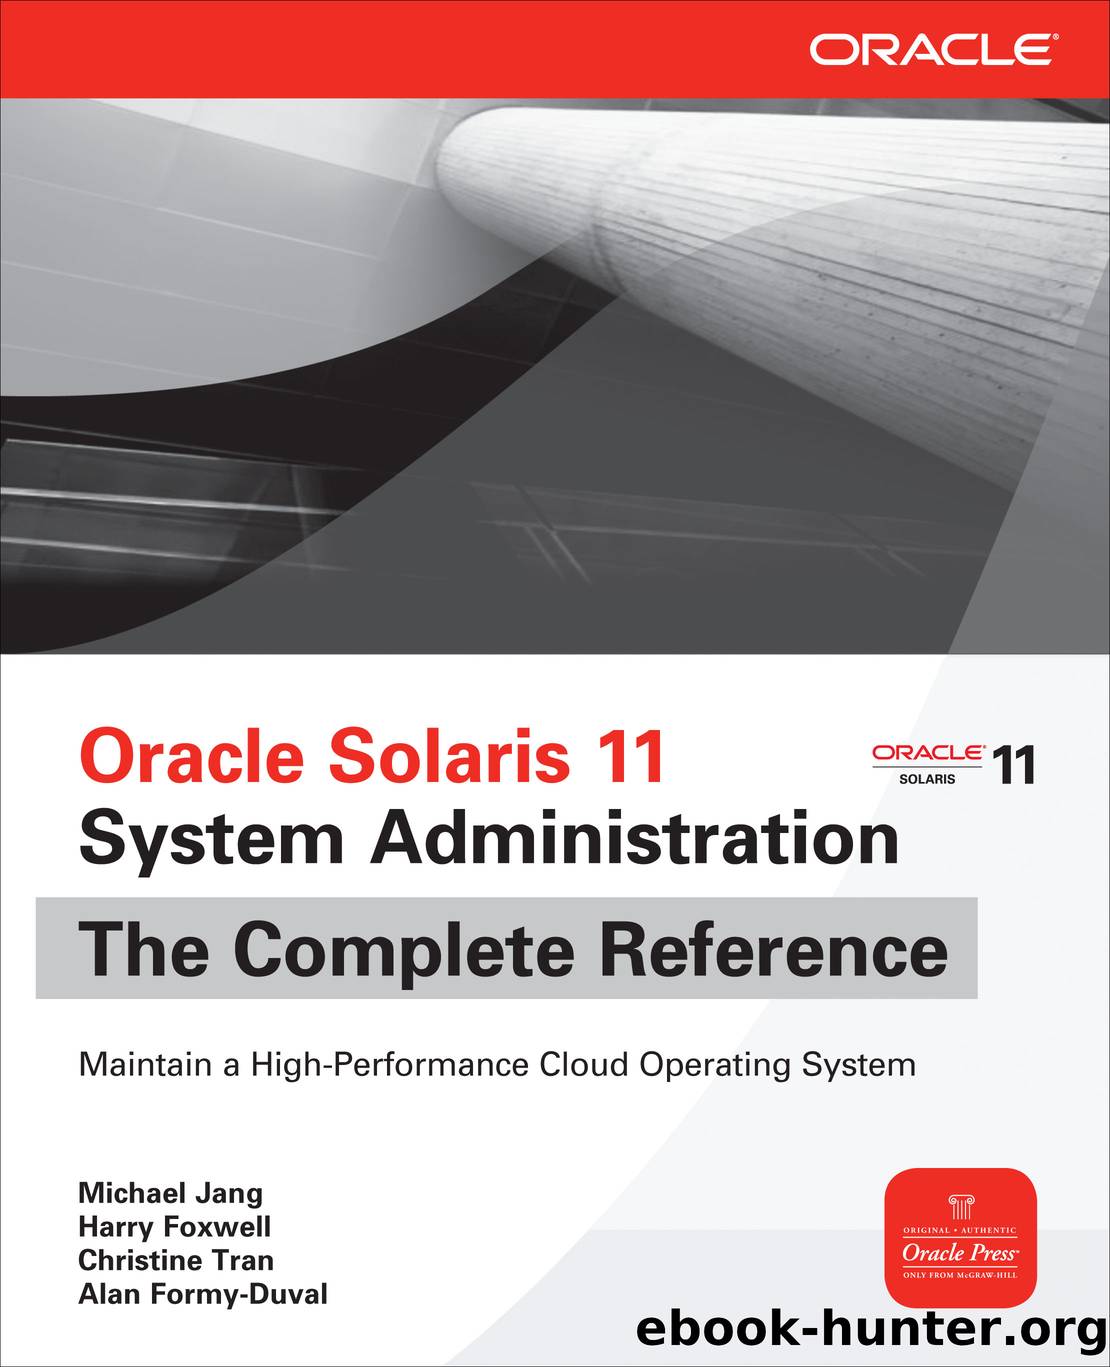 Oracle Solaris 11 System Administration The Complete Reference by Michael Jang Harry Foxwell